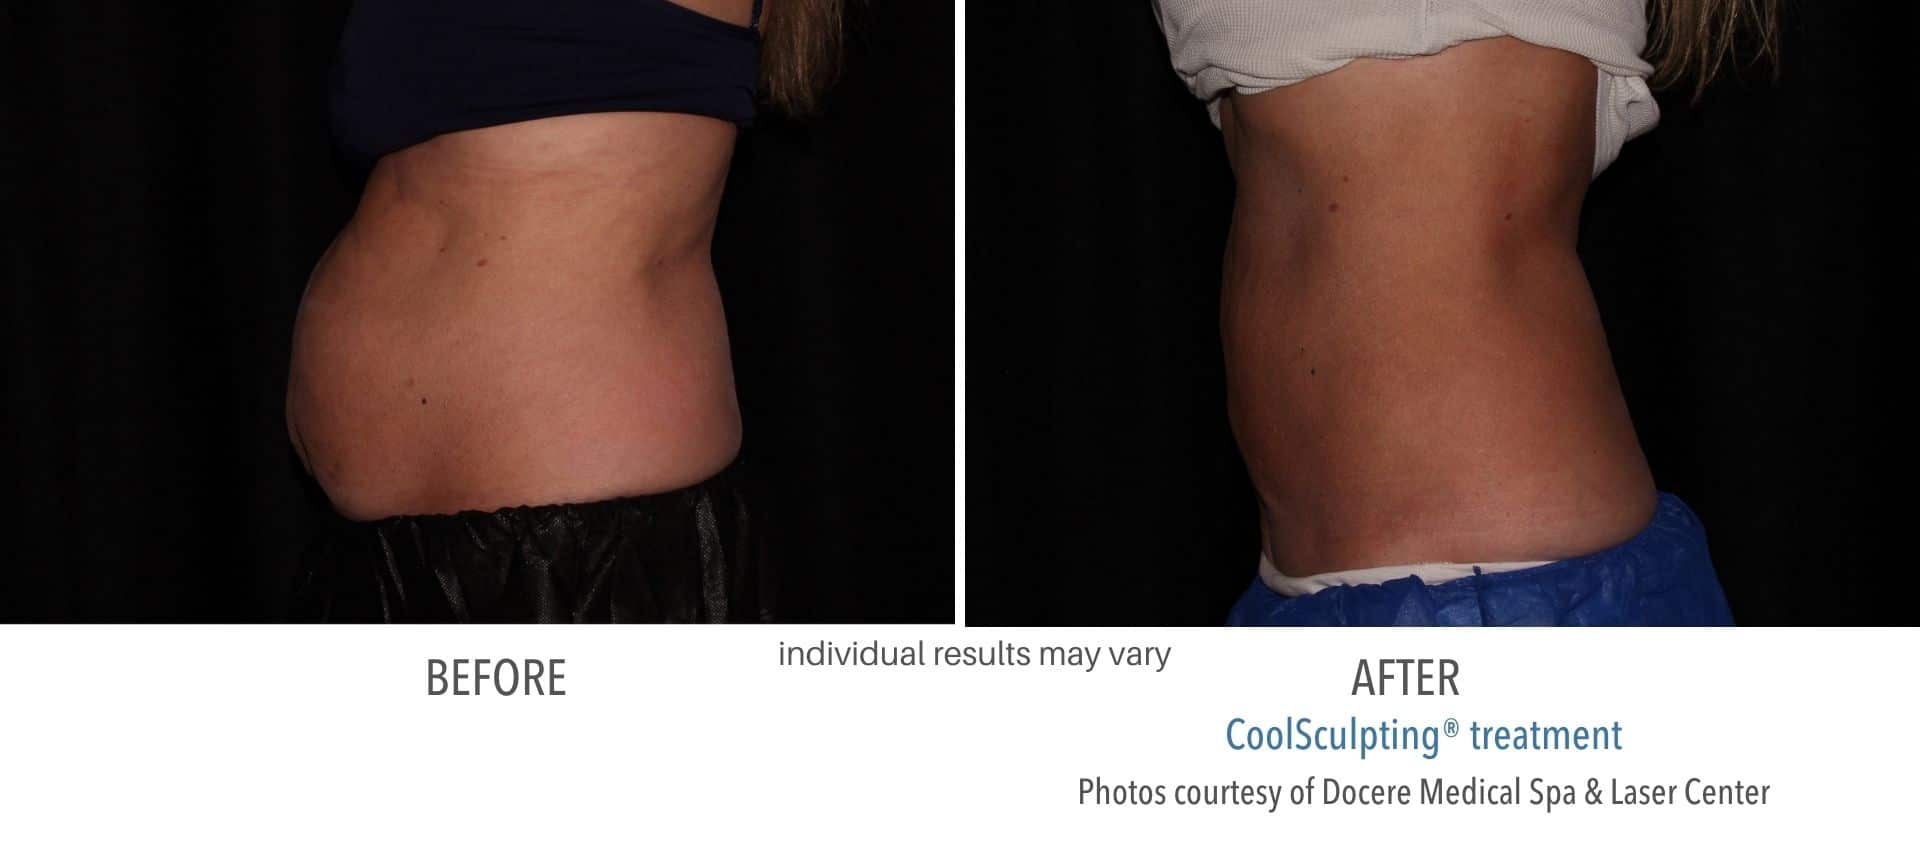 Real patient of CoolSculpting treatment from Docere